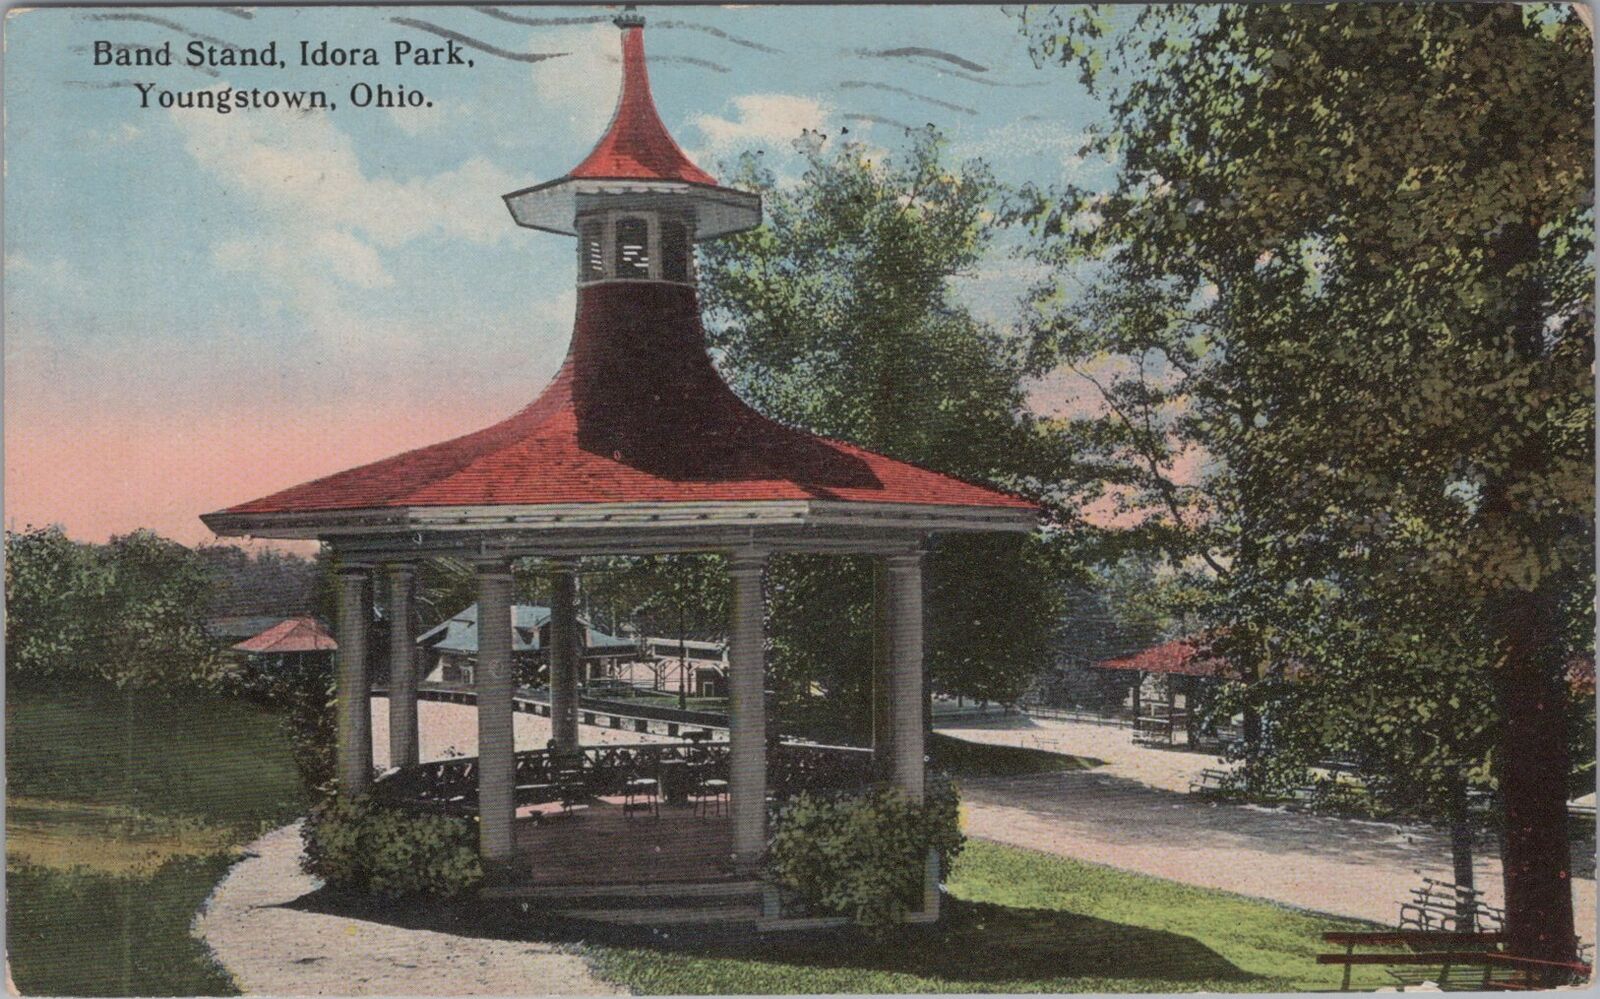 Band Stand, Idora Park, Youngstown Ohio 1914 Postcard